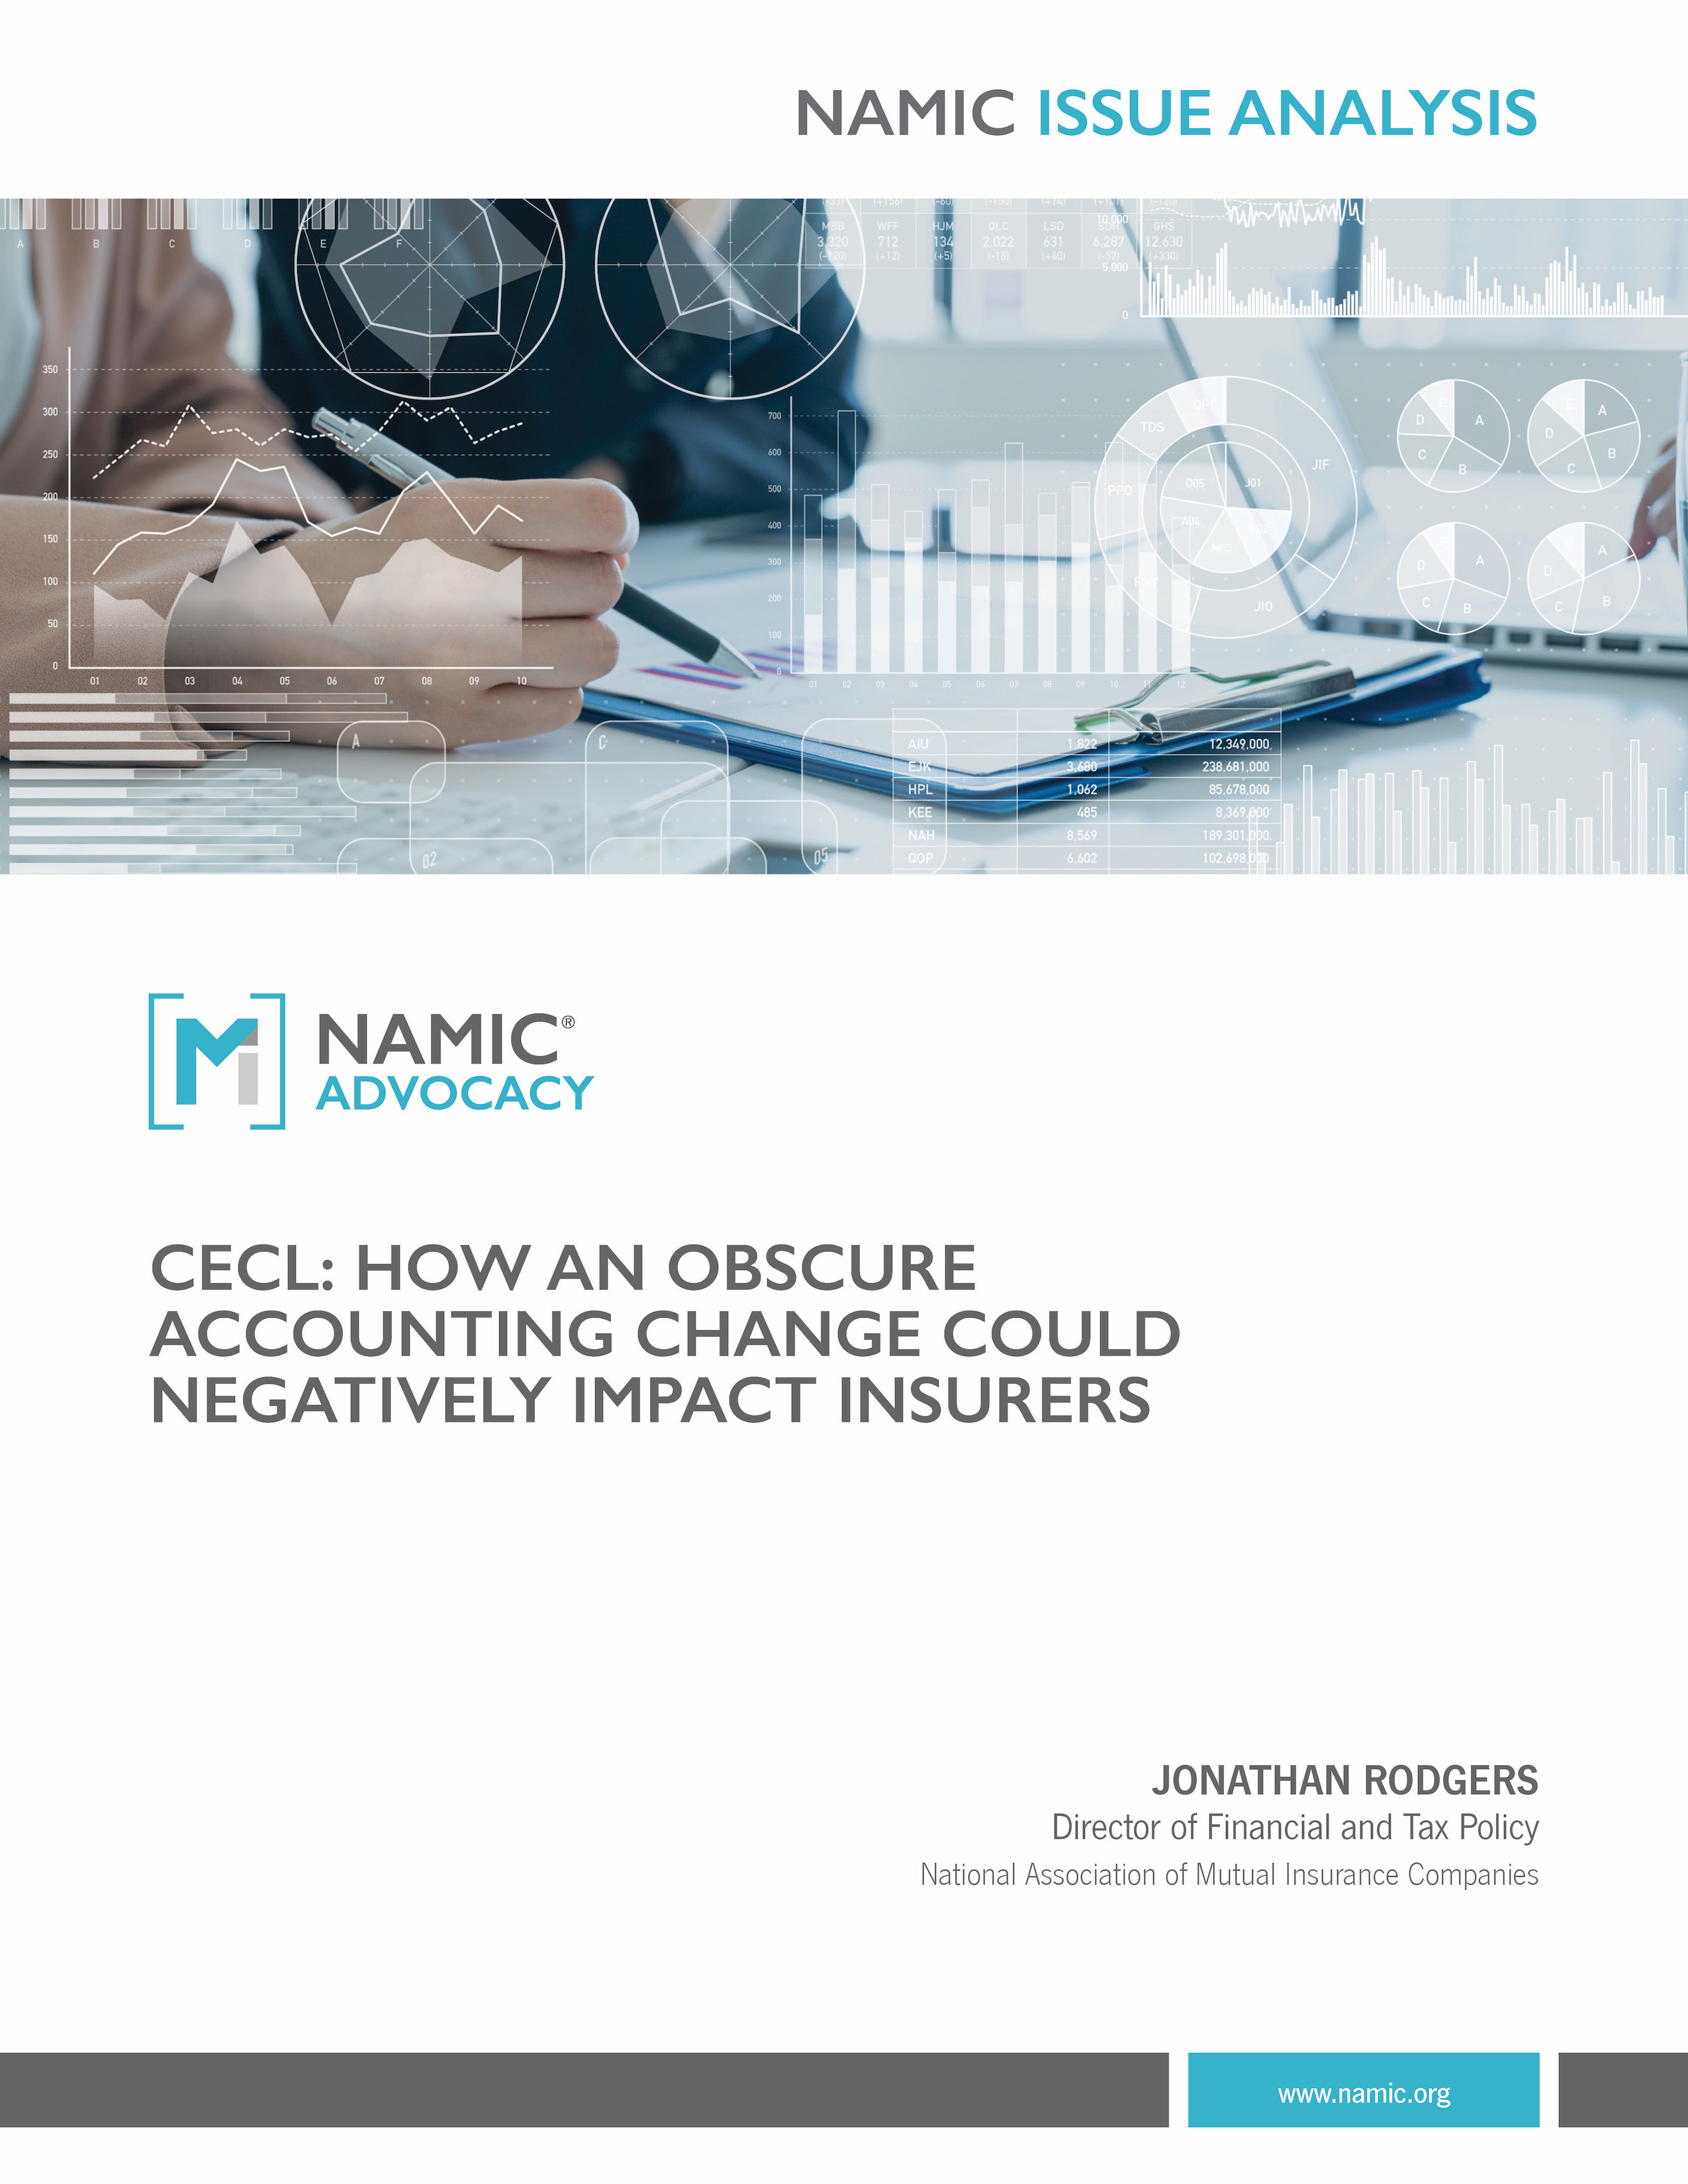 CECL: How an Obscure Accounting Change Could Negatively Impact Insurers PDF